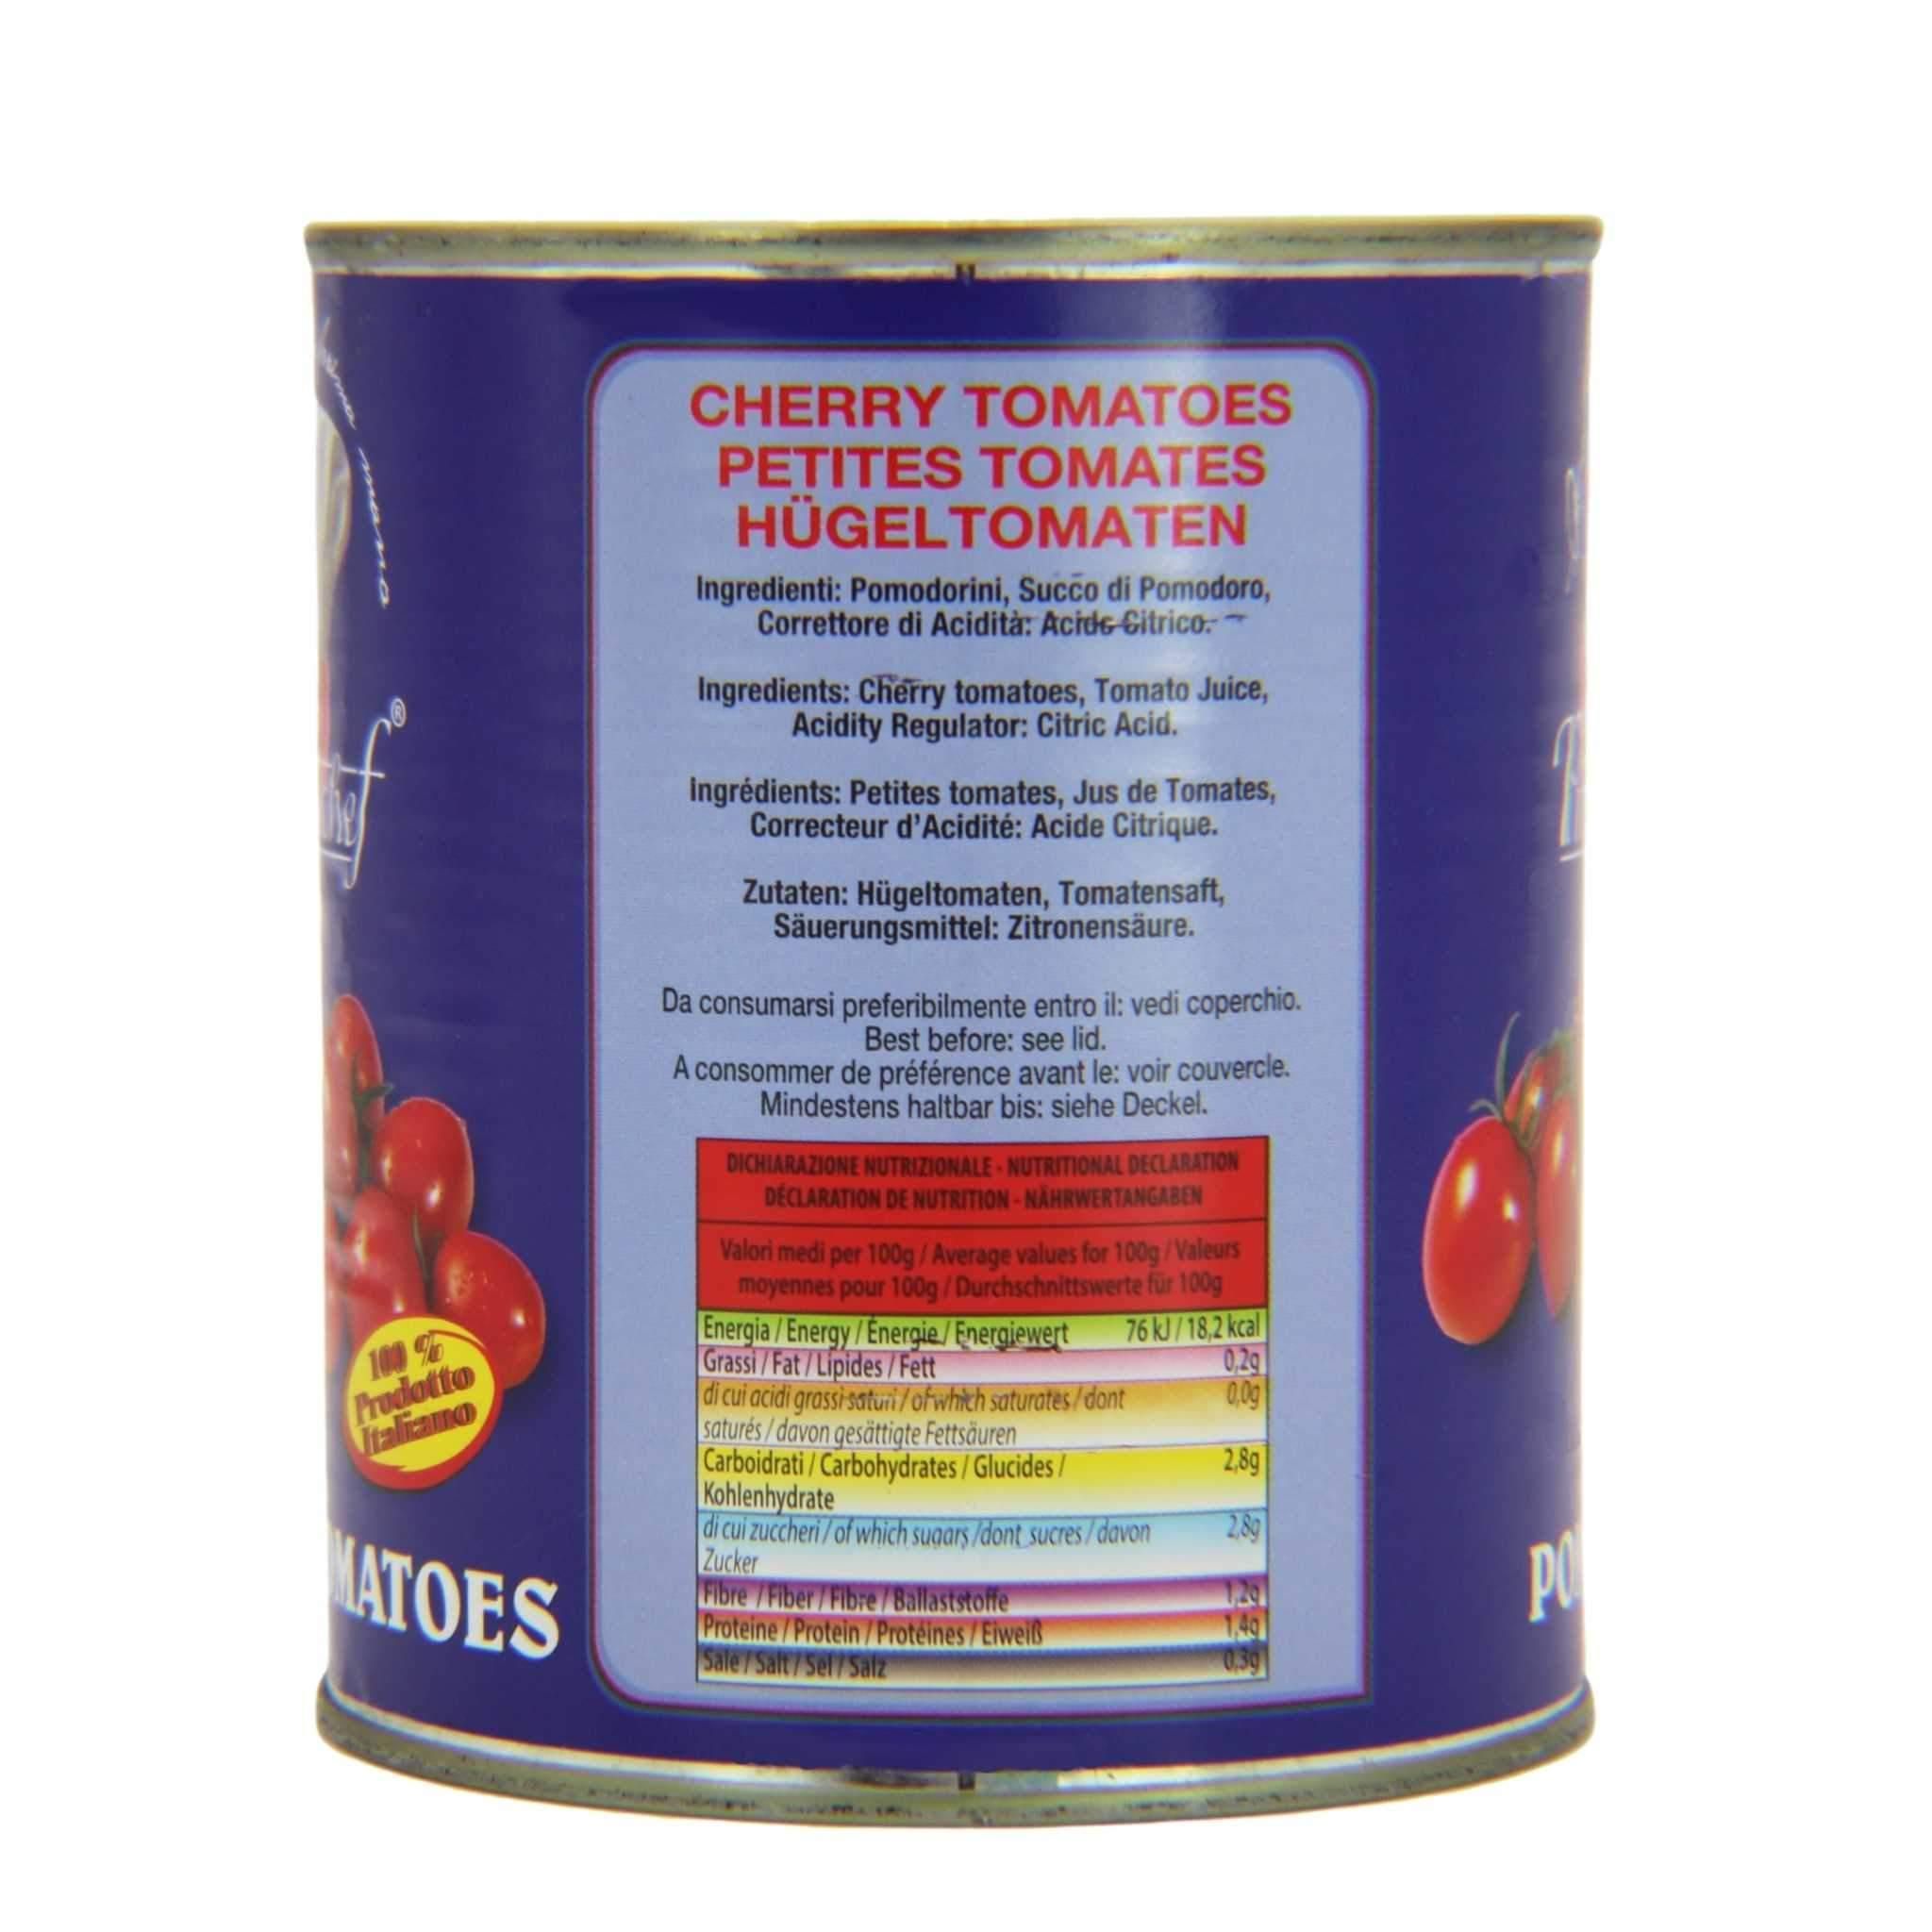 ProntoChef Cherry Tomatoes 28 oz. can. - Wholesale Italian Food